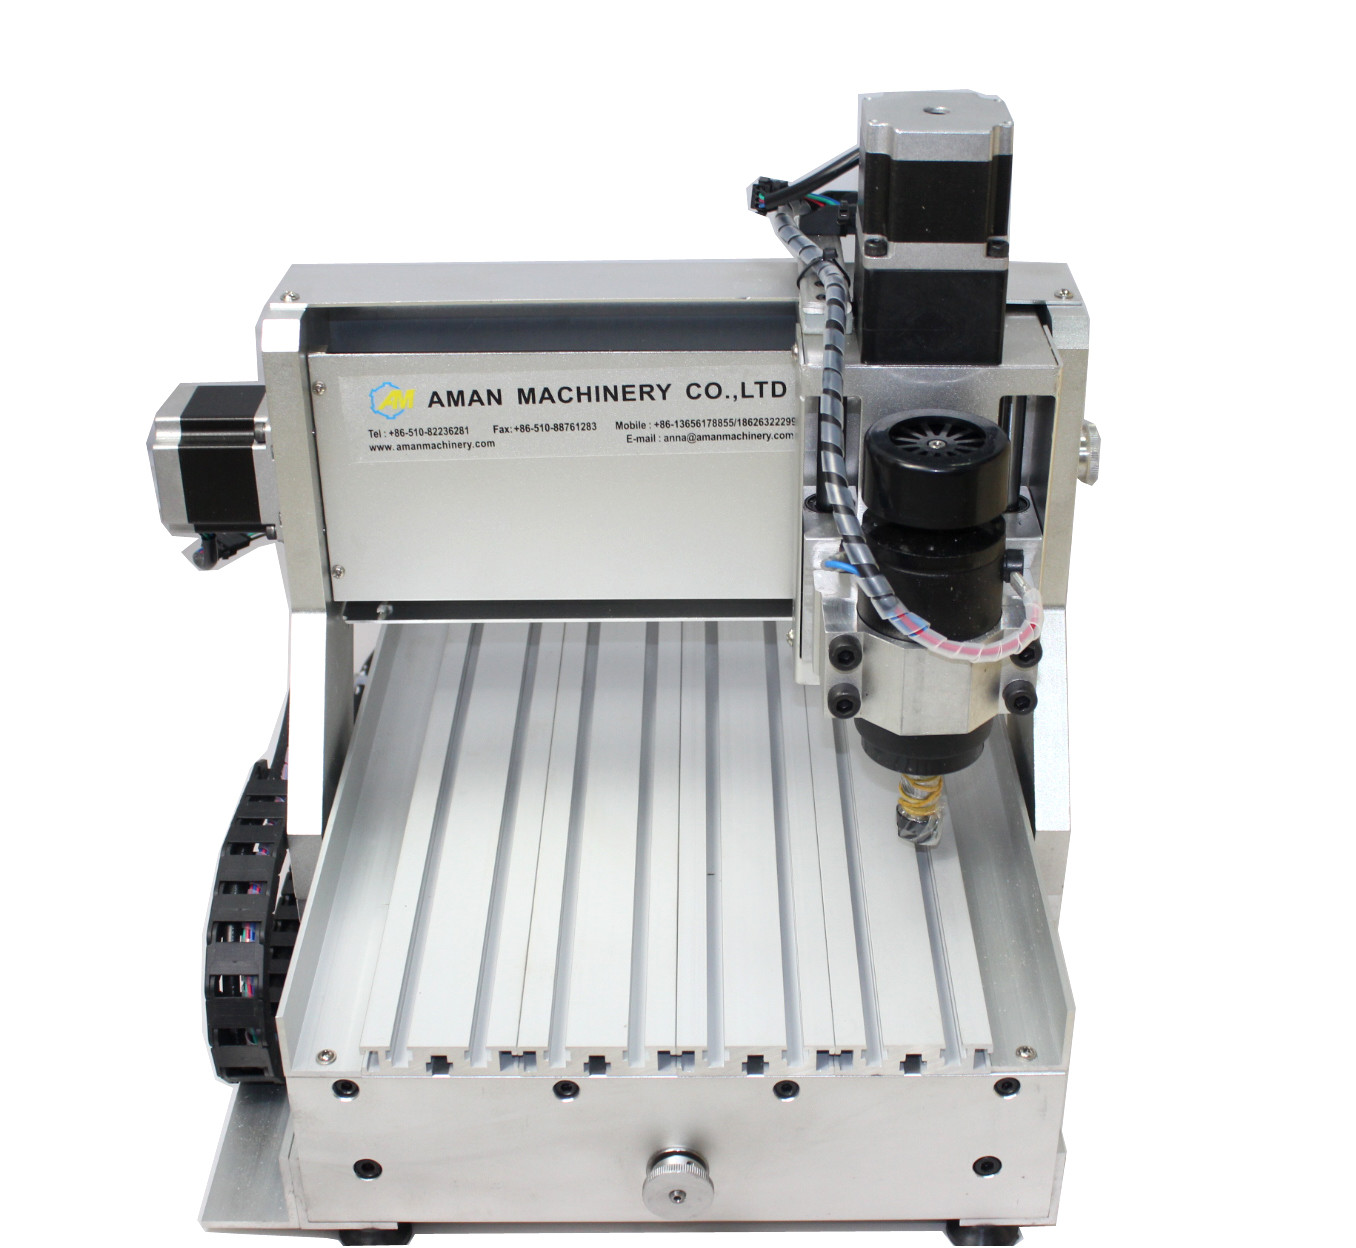 China 2030 500W 4 AXIS Small wood carving milling cutting machine wood design router for sale wholesale